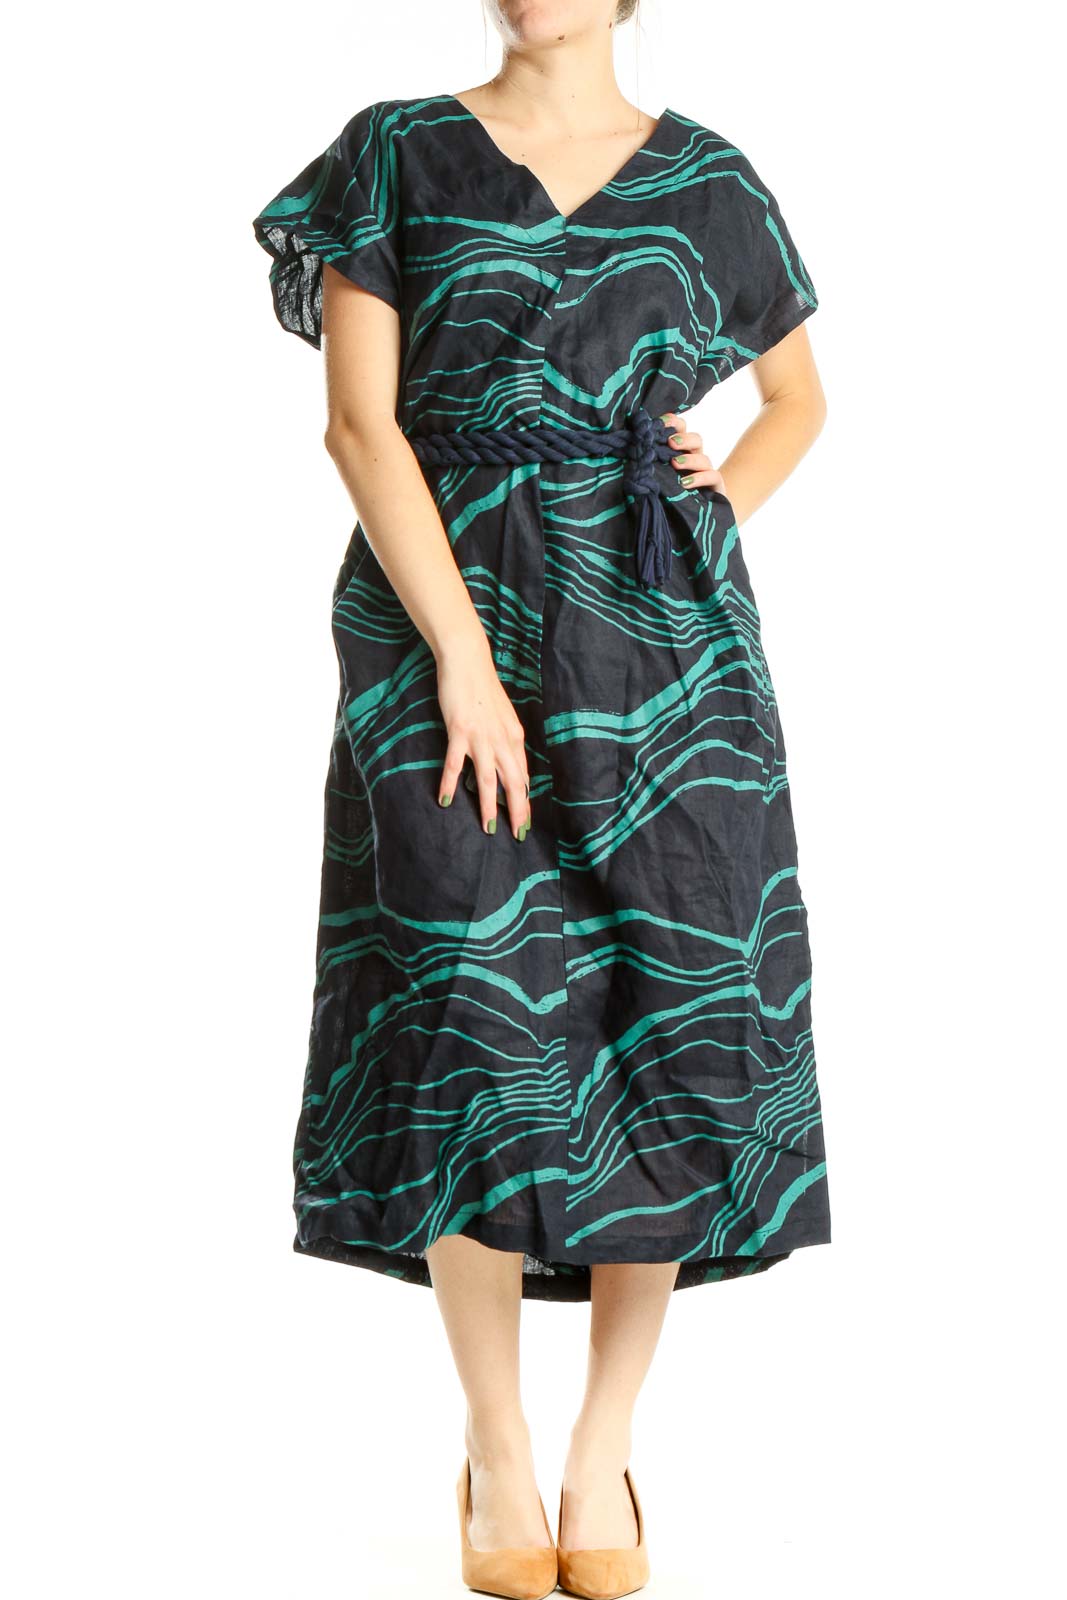 Blue Green Abstract Printed Bohemian Dress Front